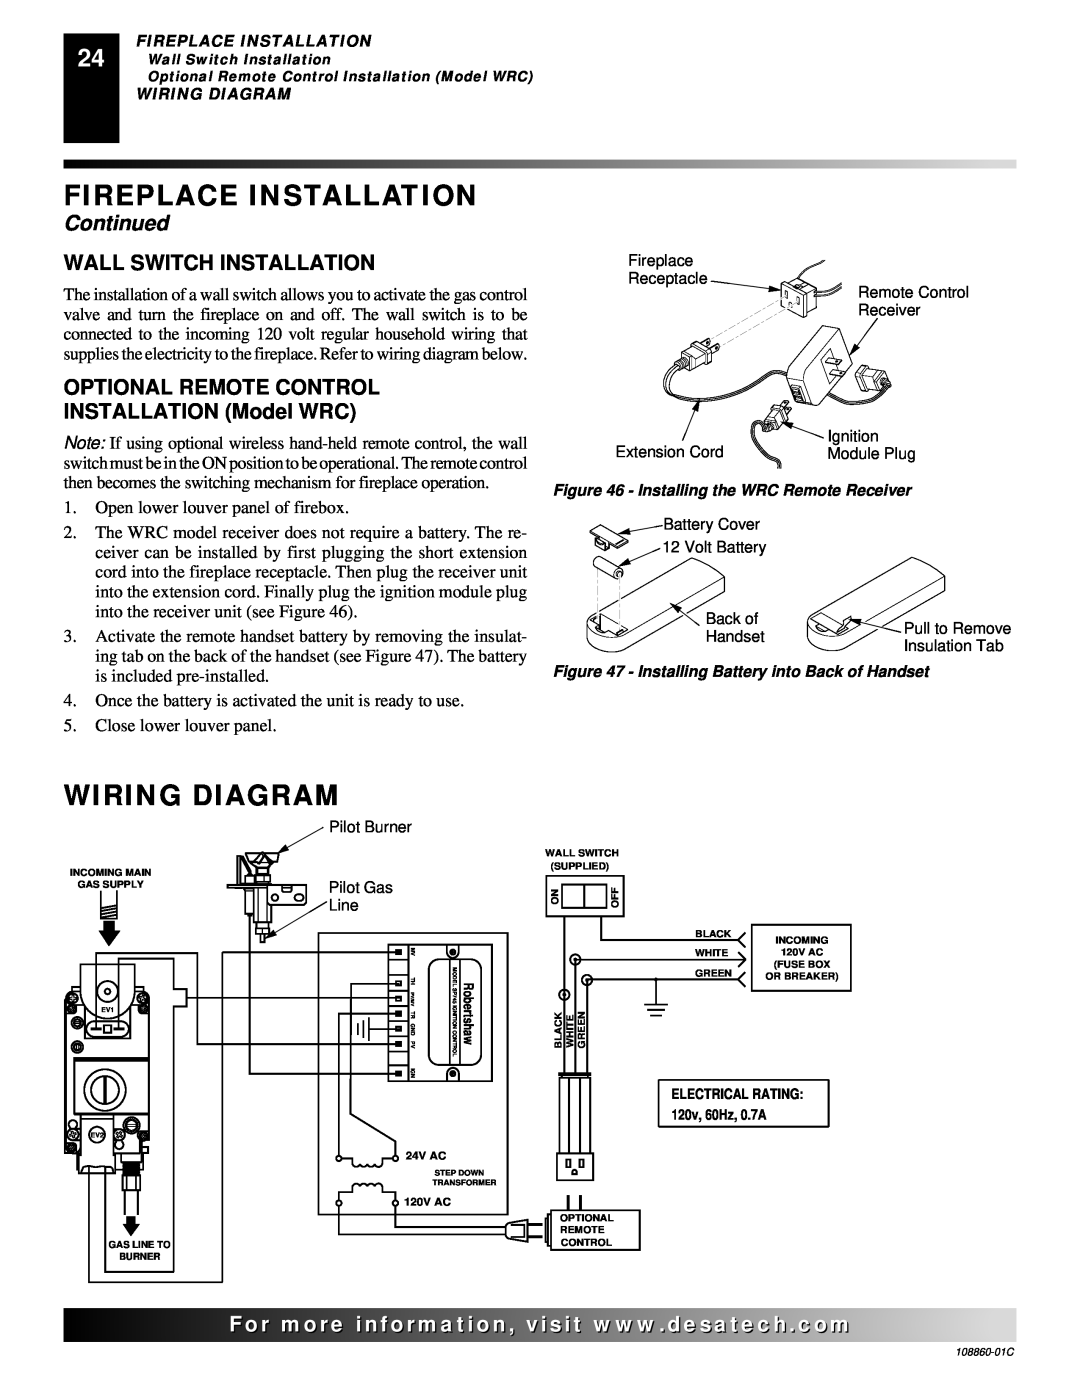 Desa (V)T36EP, (V)T36EN installation manual Wiring Diagram, Fireplace Installation, Continued, Wall Switch Installation 